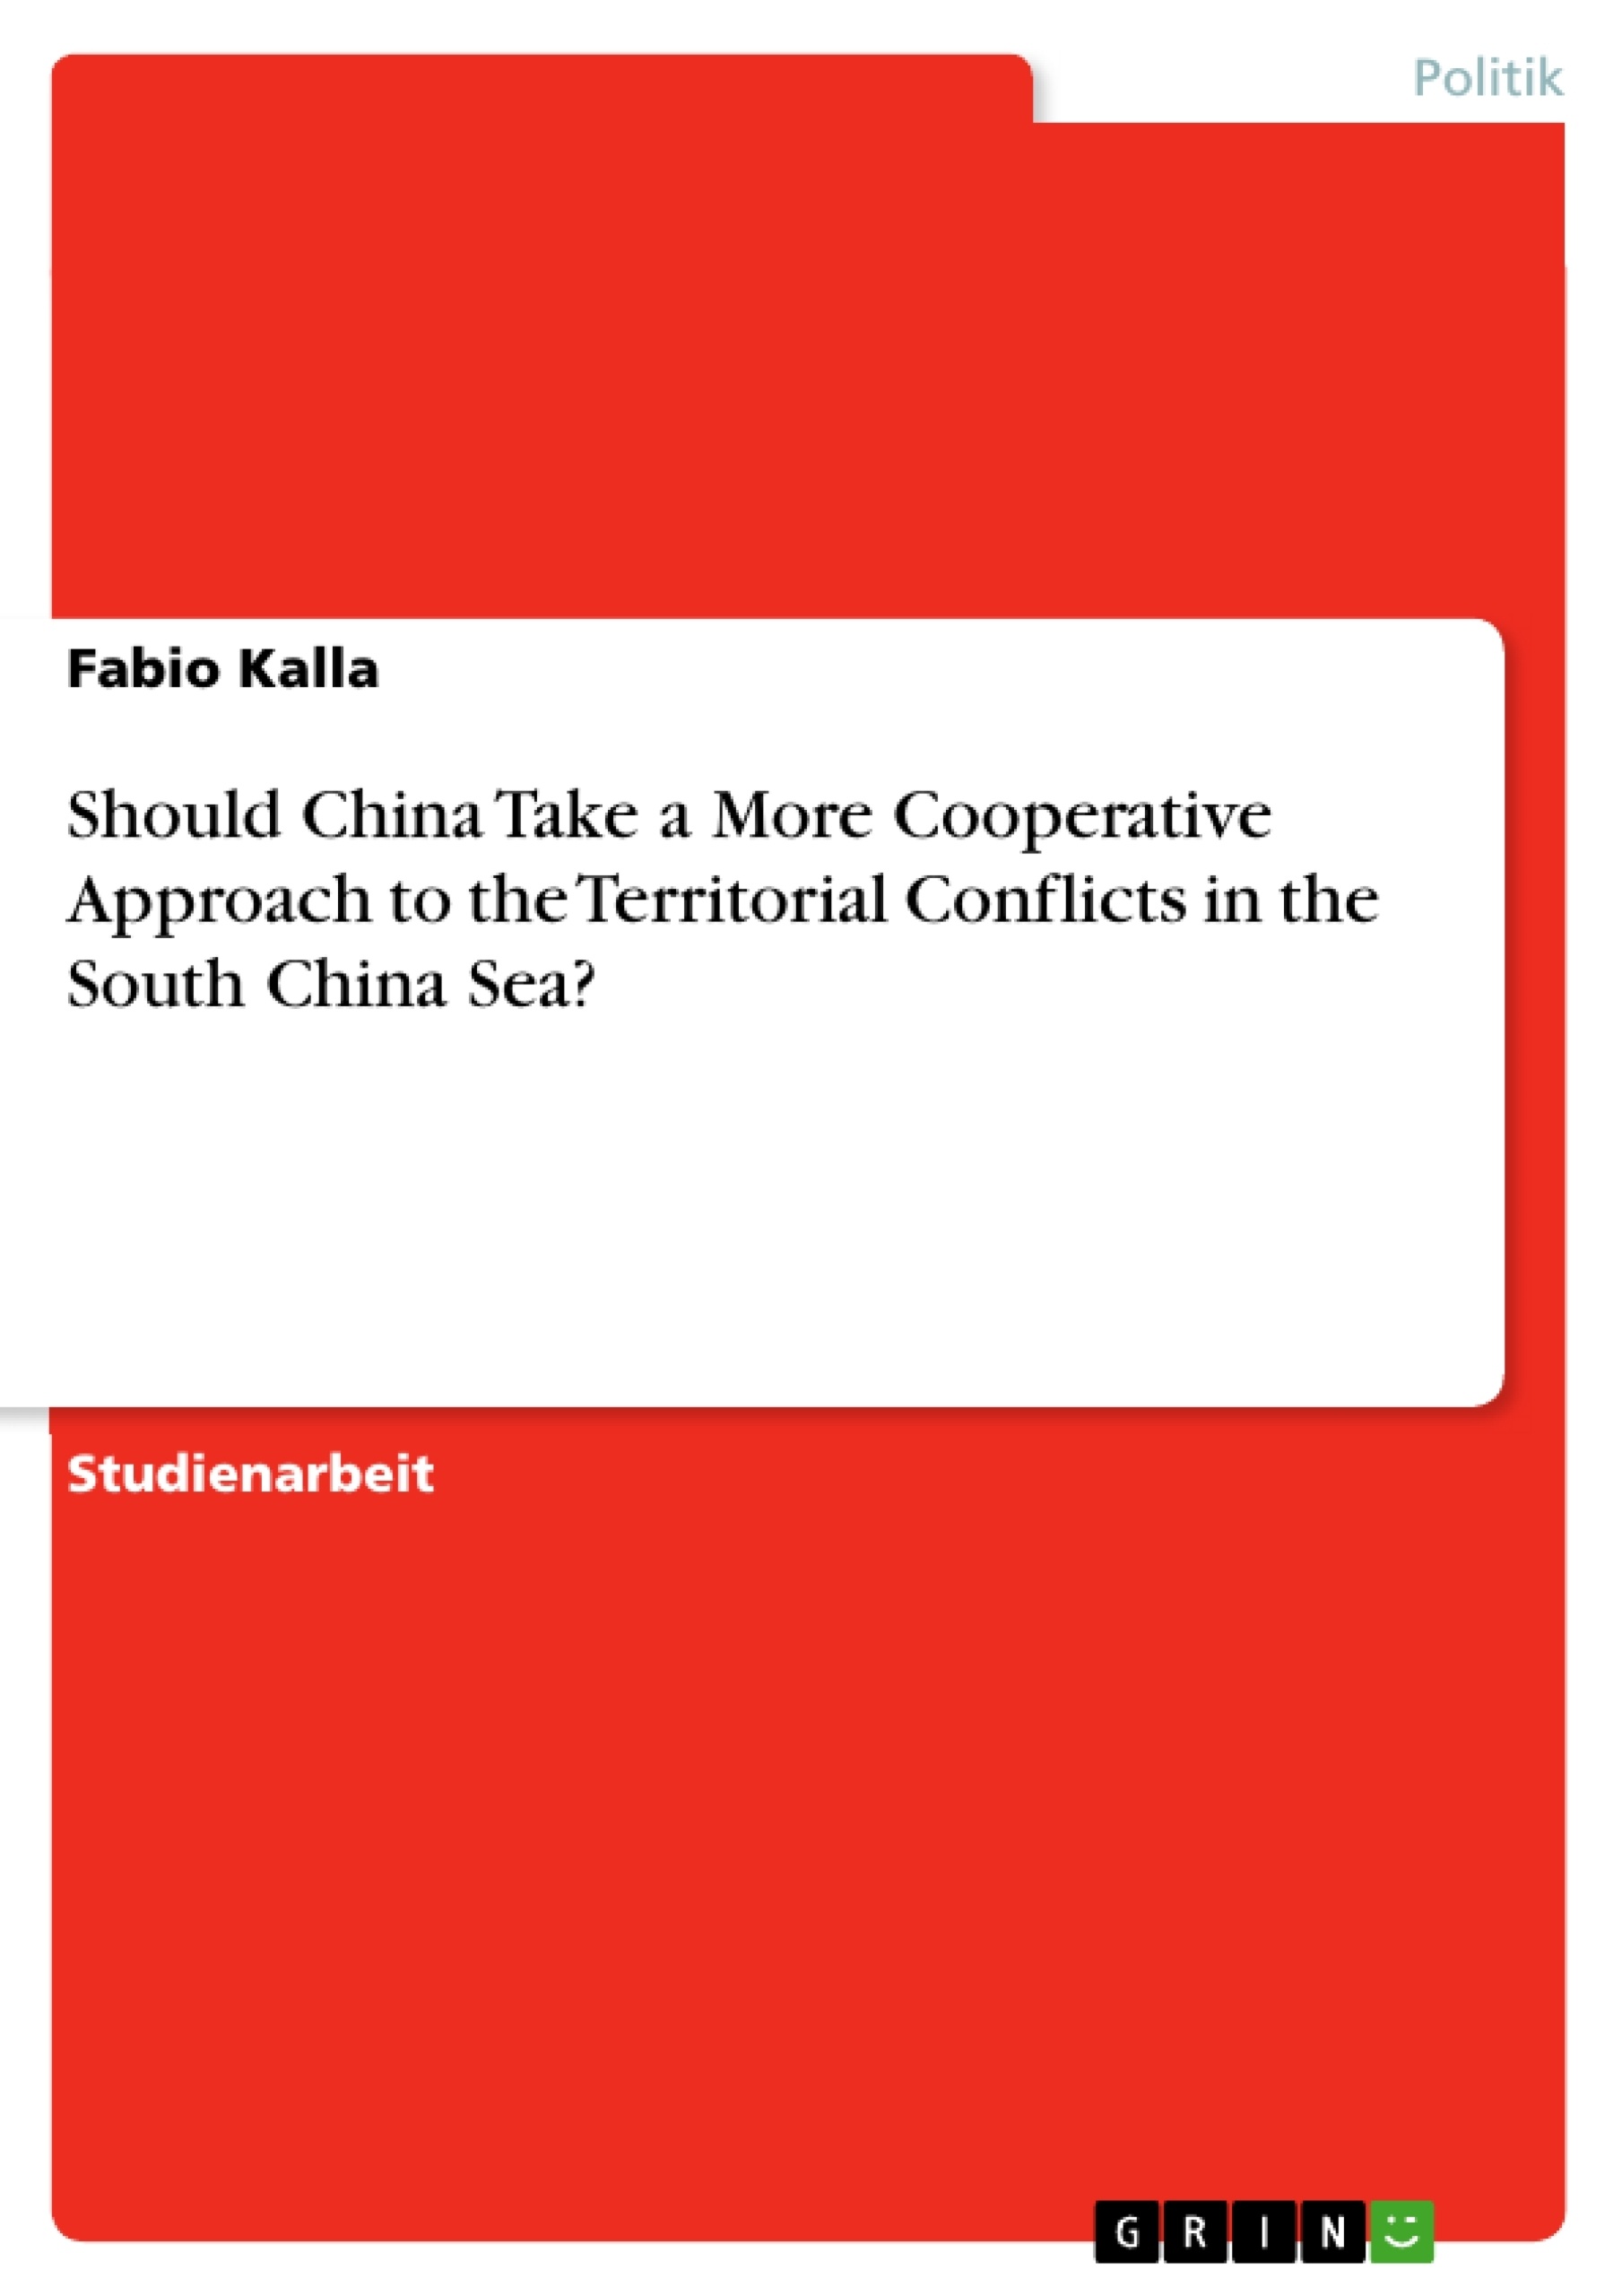 Titel: Should China Take a More Cooperative Approach to the Territorial Conflicts in the South China Sea?